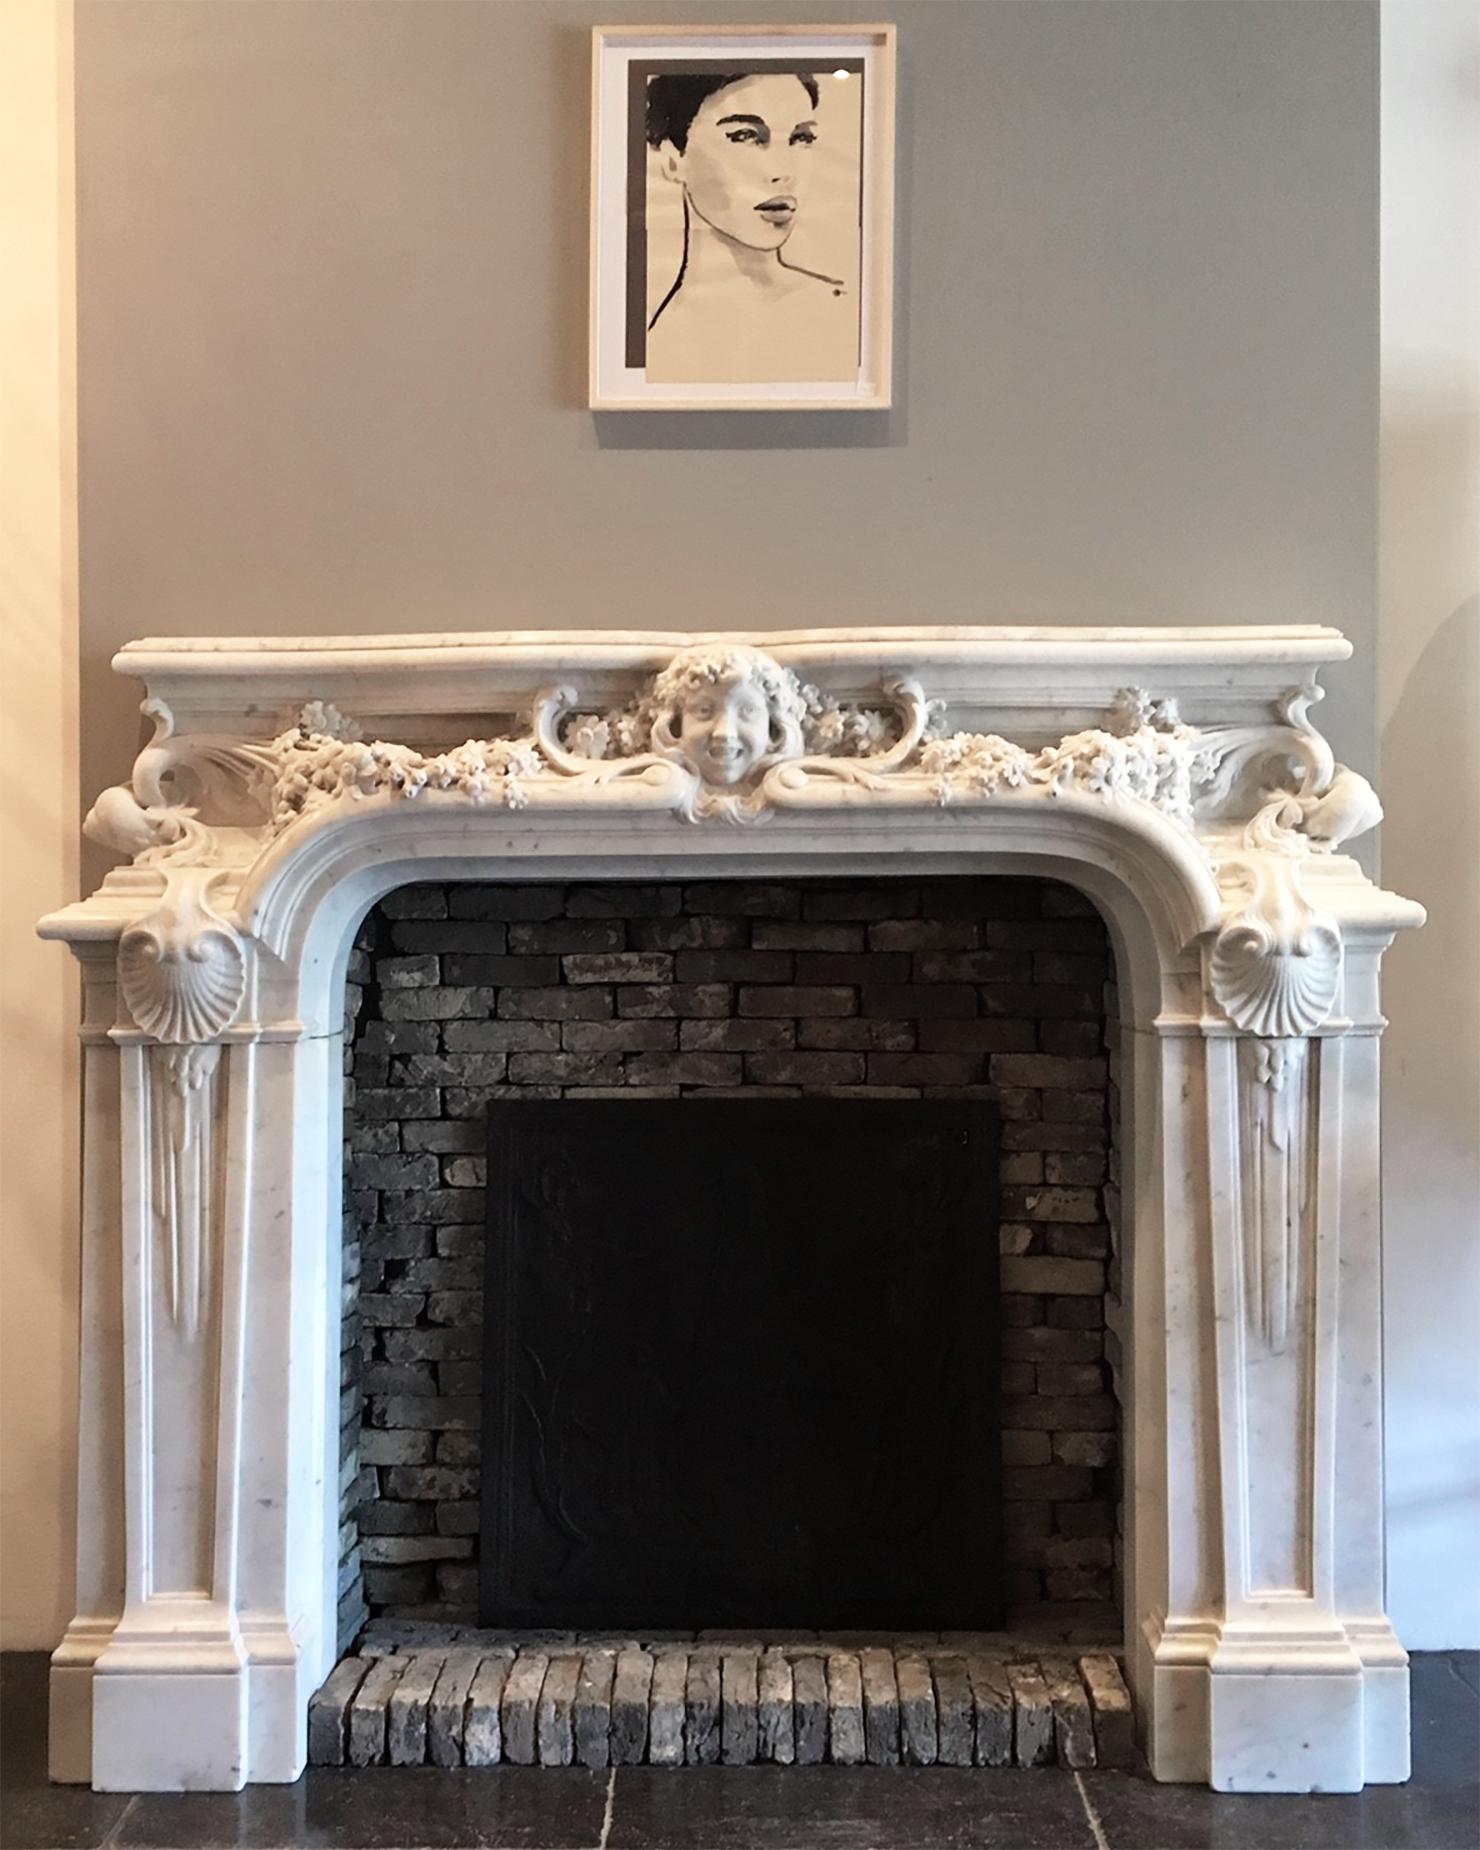 Large antique French mantelpiece of white Carrara marble, statuary quality. From the Belle Époque period in Classical Art Nouveau style. The central cartouche has the portrait of a grinning girl, flanked to either side by finely carved guirlandes of